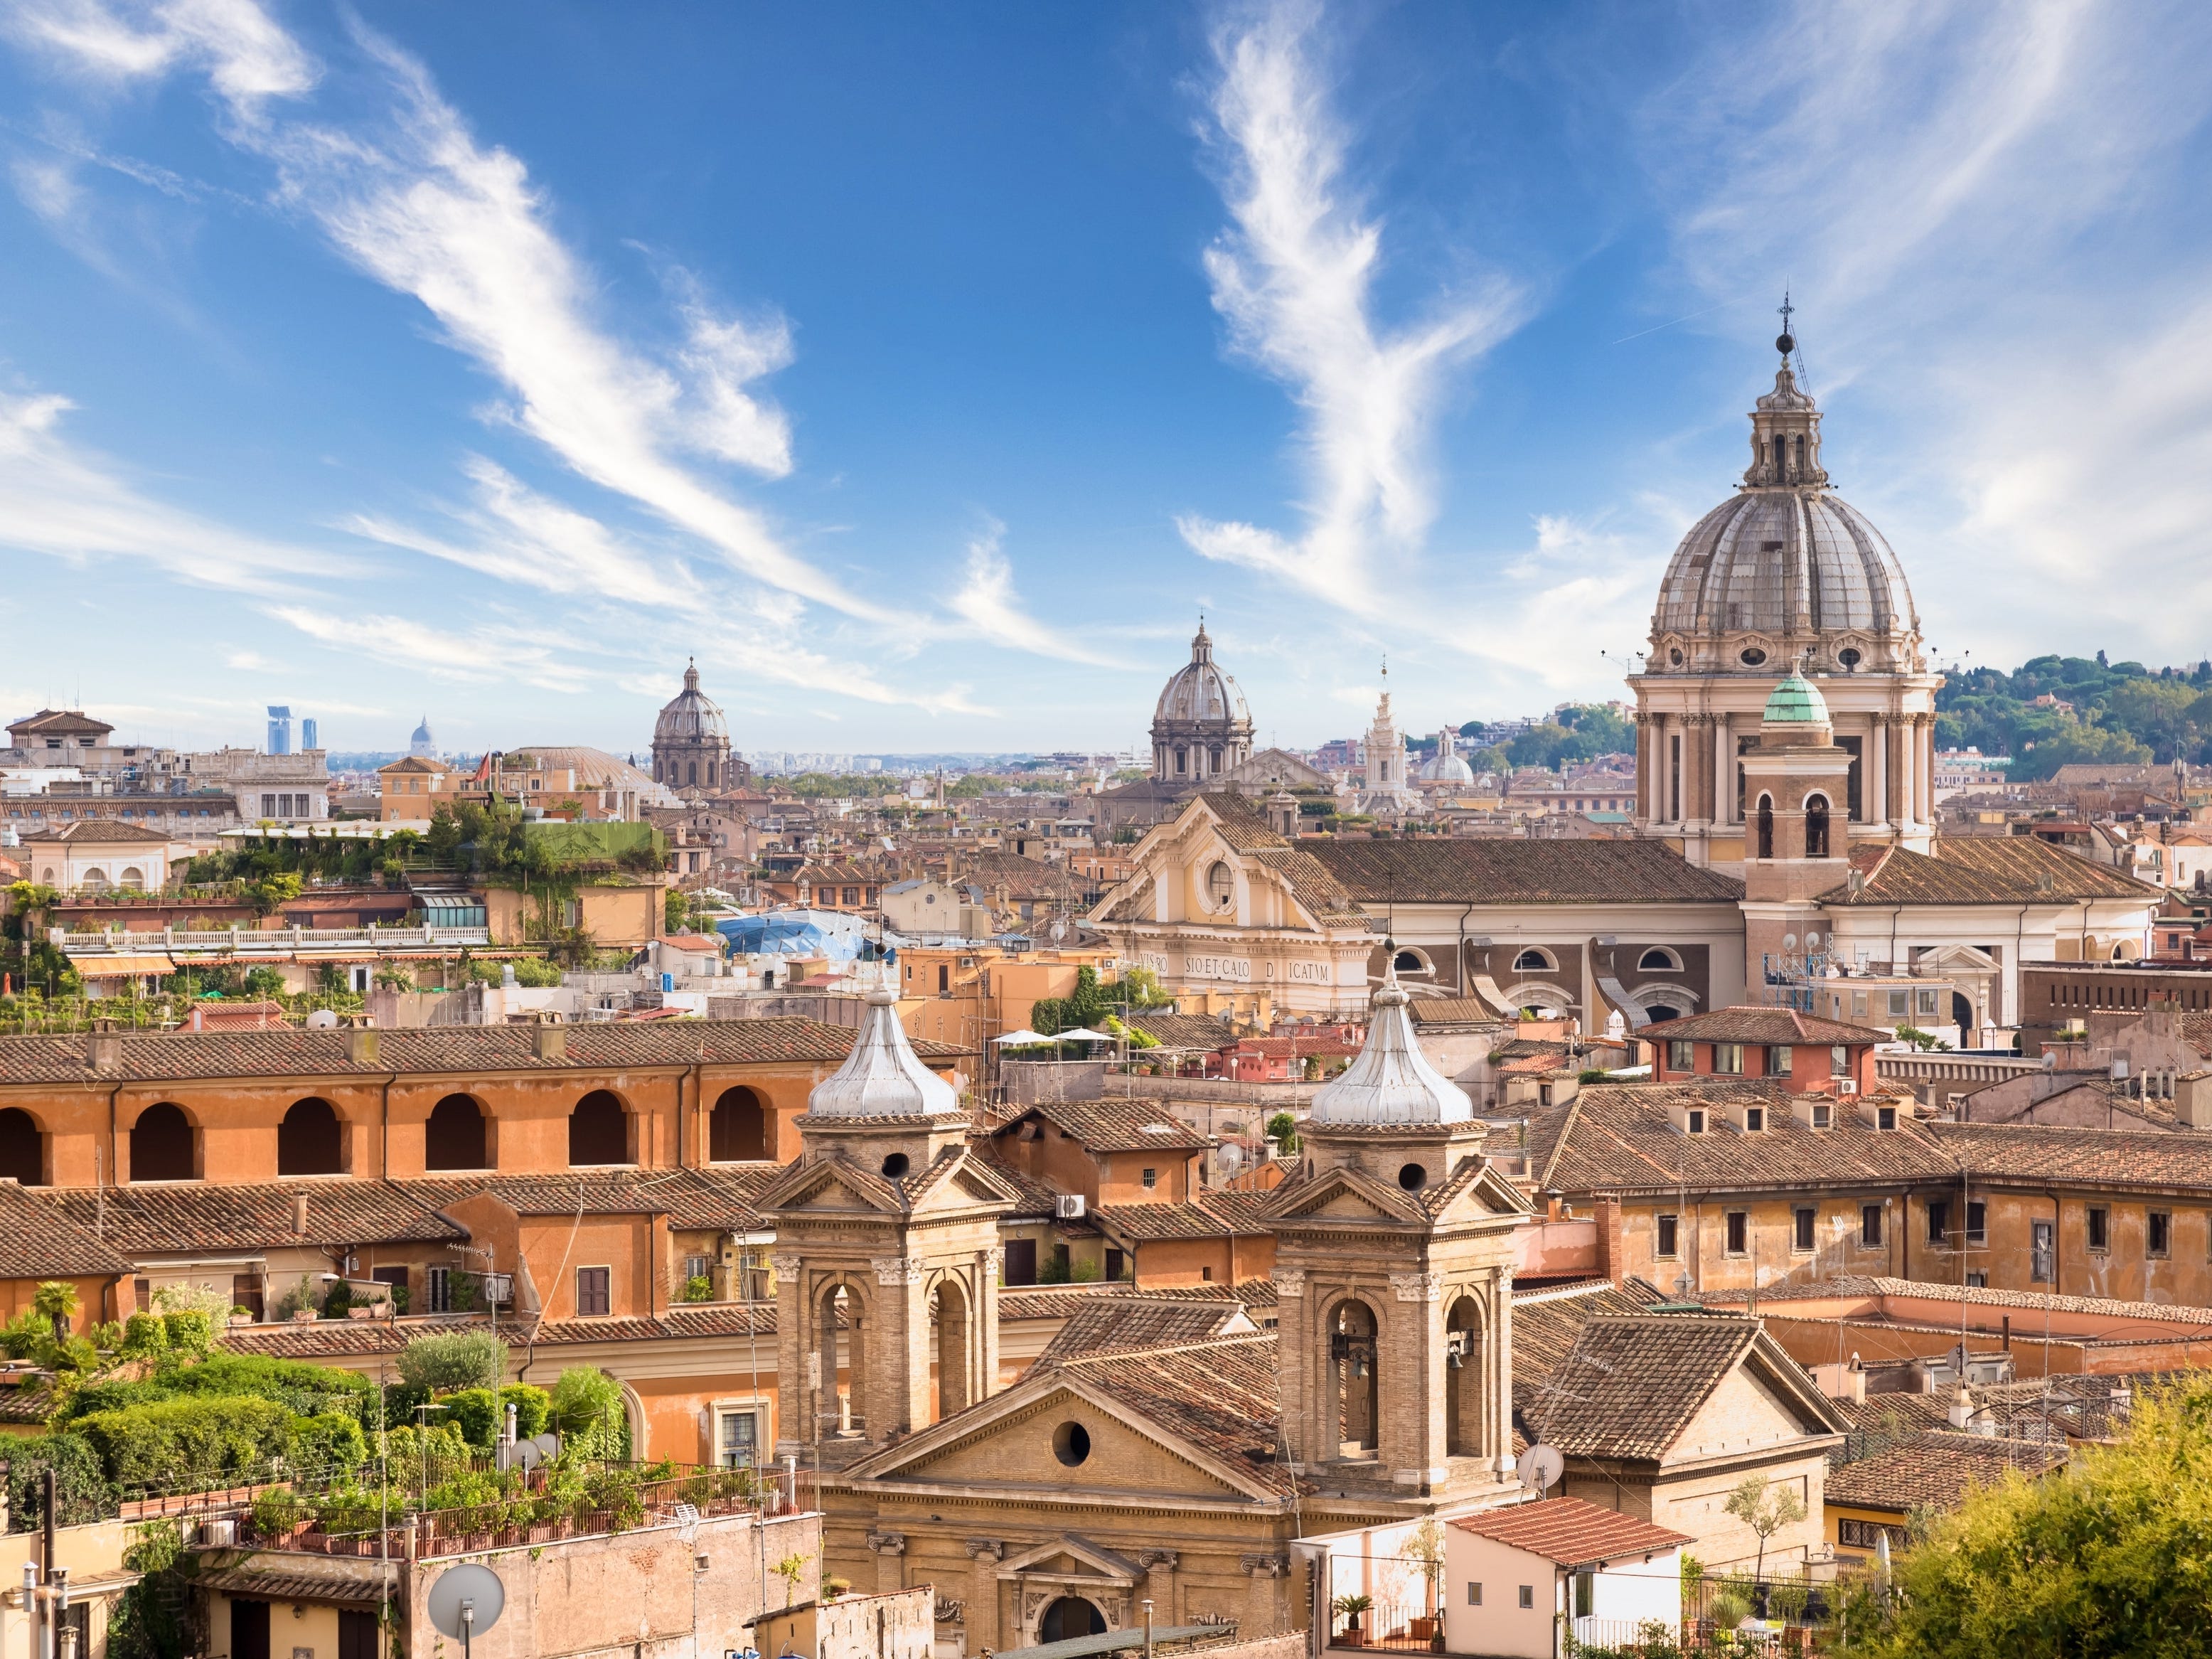 <ul class="summary-list"><li>After 16 years of working as a <a href="https://www.businessinsider.com/tourist-mistakes-rome-longtime-tour-guide-italy-2024-3">tour guide in Rome</a>, I've figured out the best attractions.</li><li>I always recommend visiting the Park of the Aqueducts and the <a href="https://www.businessinsider.com/underrated-italian-attraction-ostia-antica-near-rome-tour-guide-2024">Ostia Antica</a> archeological site.</li><li>But I think the Colosseum, Trevi Fountain, and Mouth of Truth attractions are overcrowded. </li></ul><p>Rome is pretty crowded — the city welcomed a <a href="https://www.touristitaly.com/rome-travel-trends-experiental-travel/">record-breaking 35 million tourists</a> in 2023. Any gorgeous photos you see of breathtaking and empty piazzas were likely taken long before most people have woken up.</p><p>As a seasoned Roman tour guide for the past 16 years, I would never say certain attractions have no merit. But after years of <a href="https://sarahmaygrunwald.substack.com/p/for-the-love-of-baby-jesus-please">interacting with travelers</a>, I understand that people want alternatives.</p><p>Luckily, Rome has priceless art and artifacts around every corner.</p><p>Here are five <a href="https://www.businessinsider.com/best-tourist-attractions-in-us-been-to-every-state-2024">popular attractions</a> that are worth visiting, and five you might want to skip.</p><div class="read-original">Read the original article on <a href="https://www.businessinsider.com/best-things-rome-italy-what-to-skip-tour-guide">Business Insider</a></div>